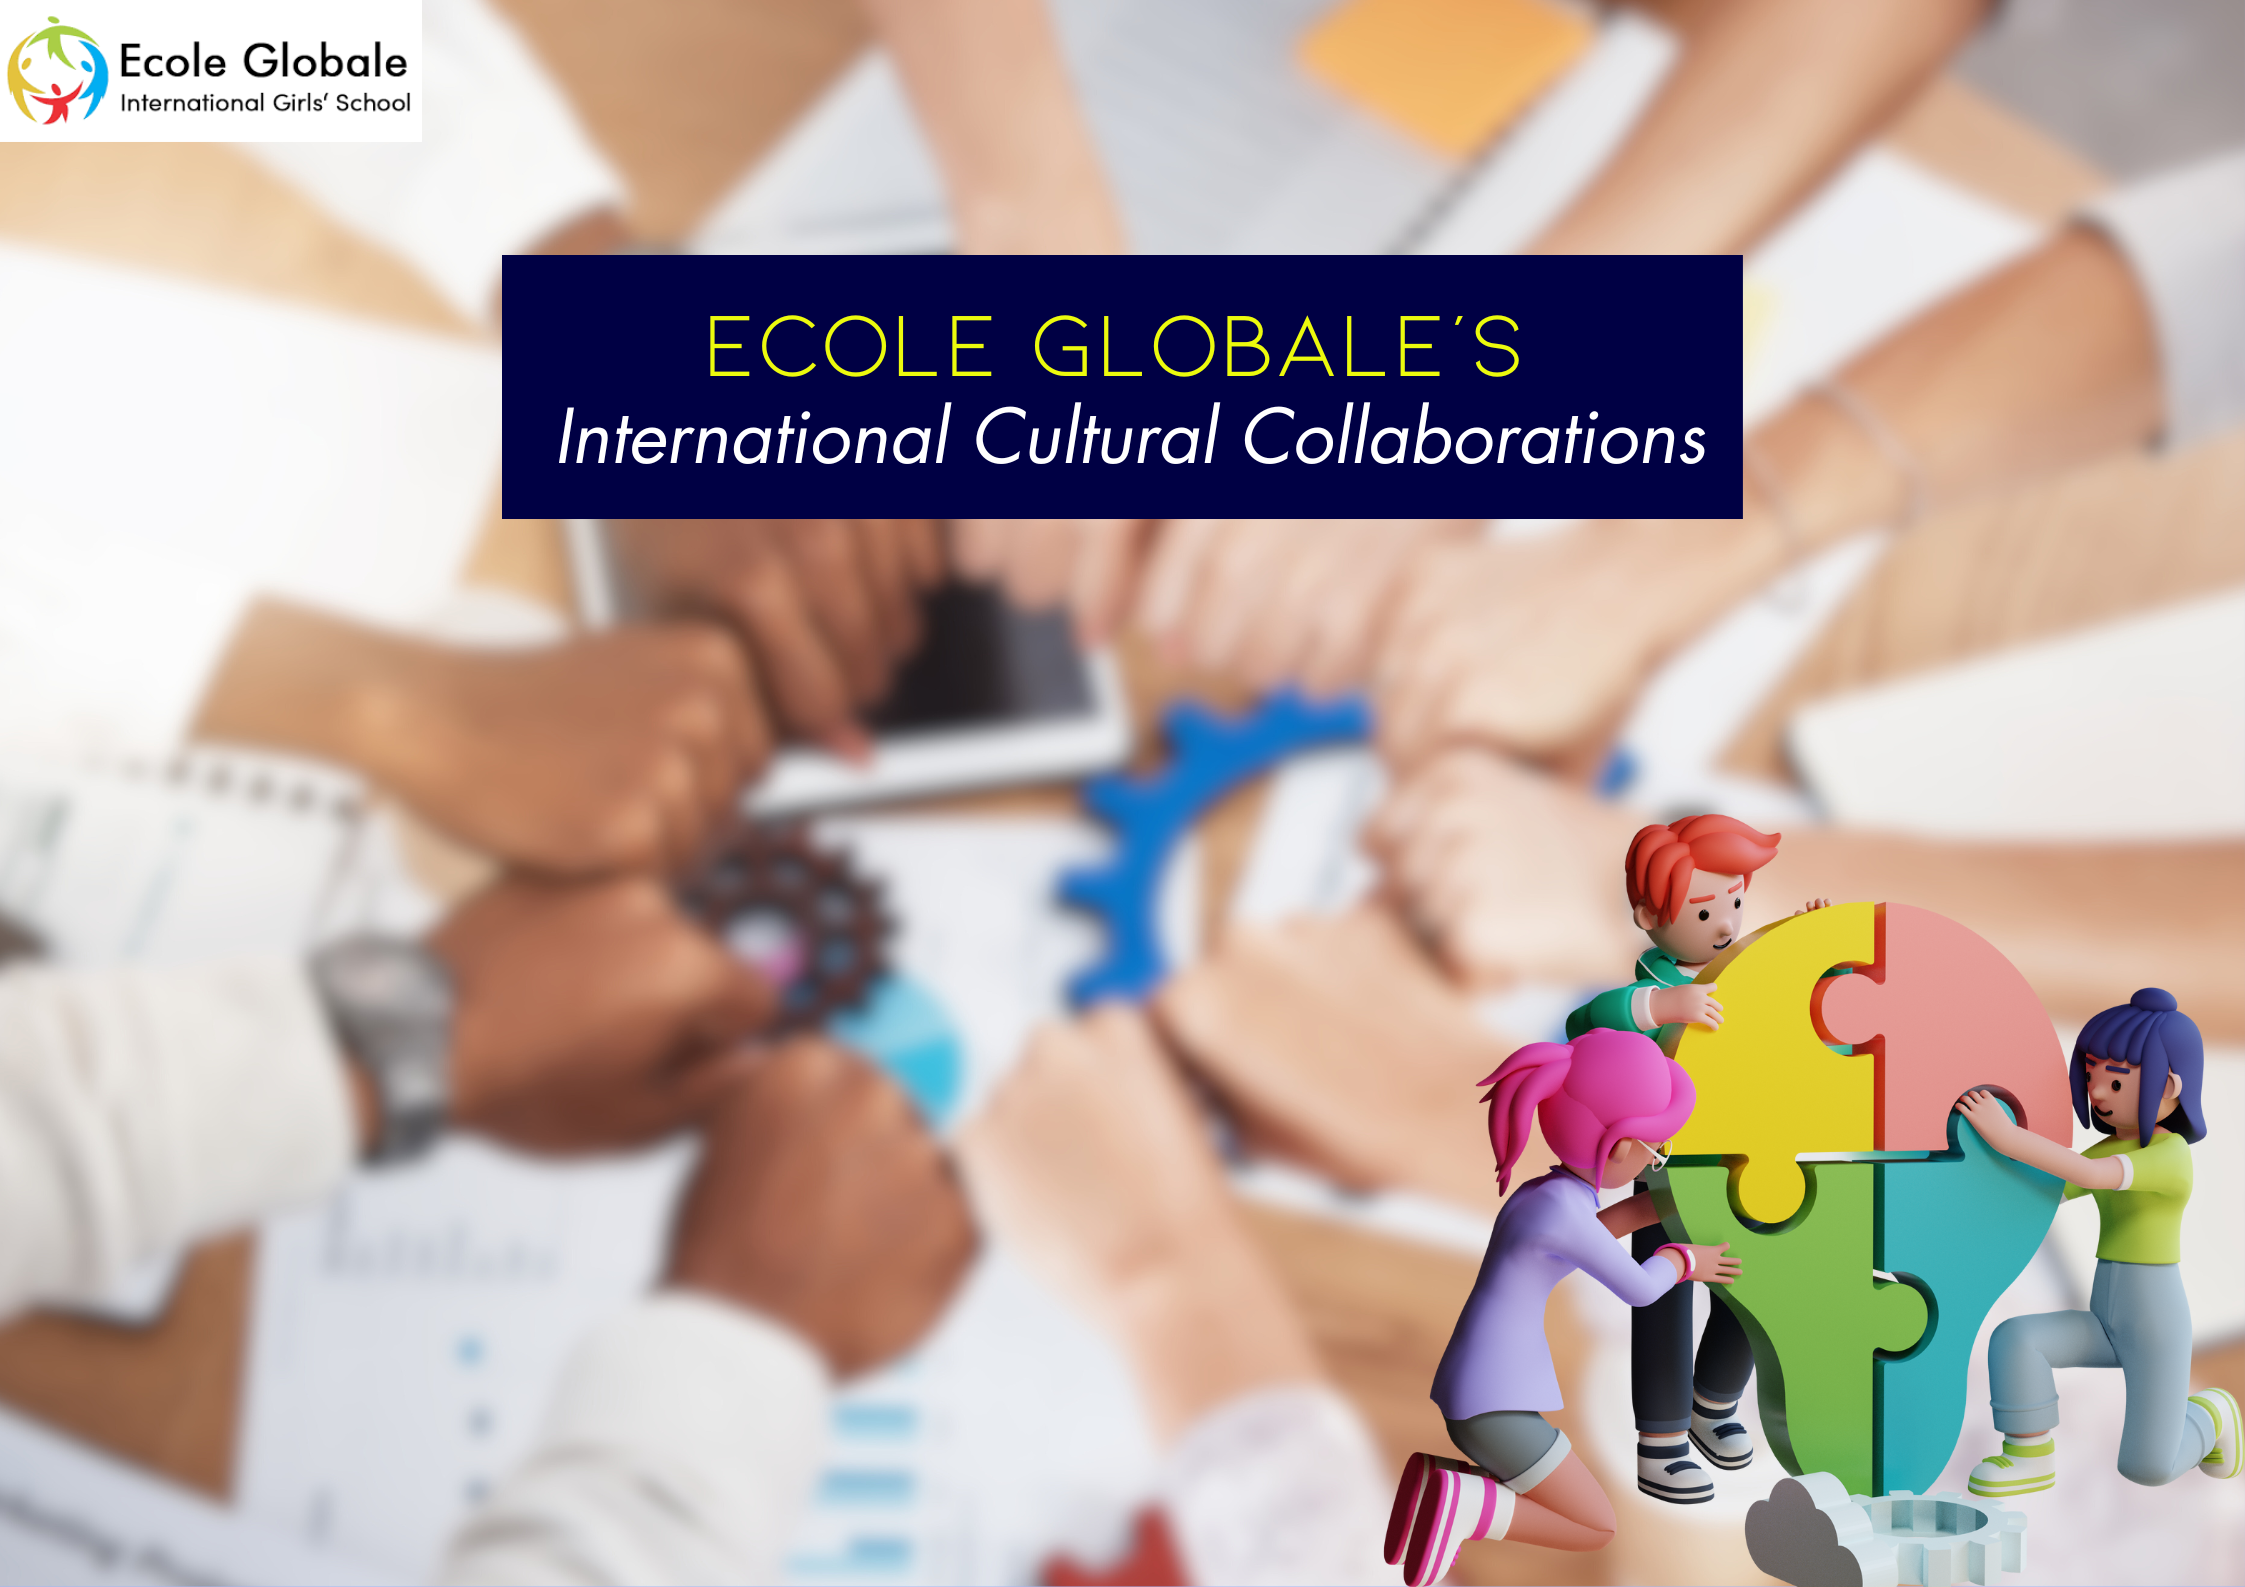 You are currently viewing Ecole Globale’s International Cultural Collaborations